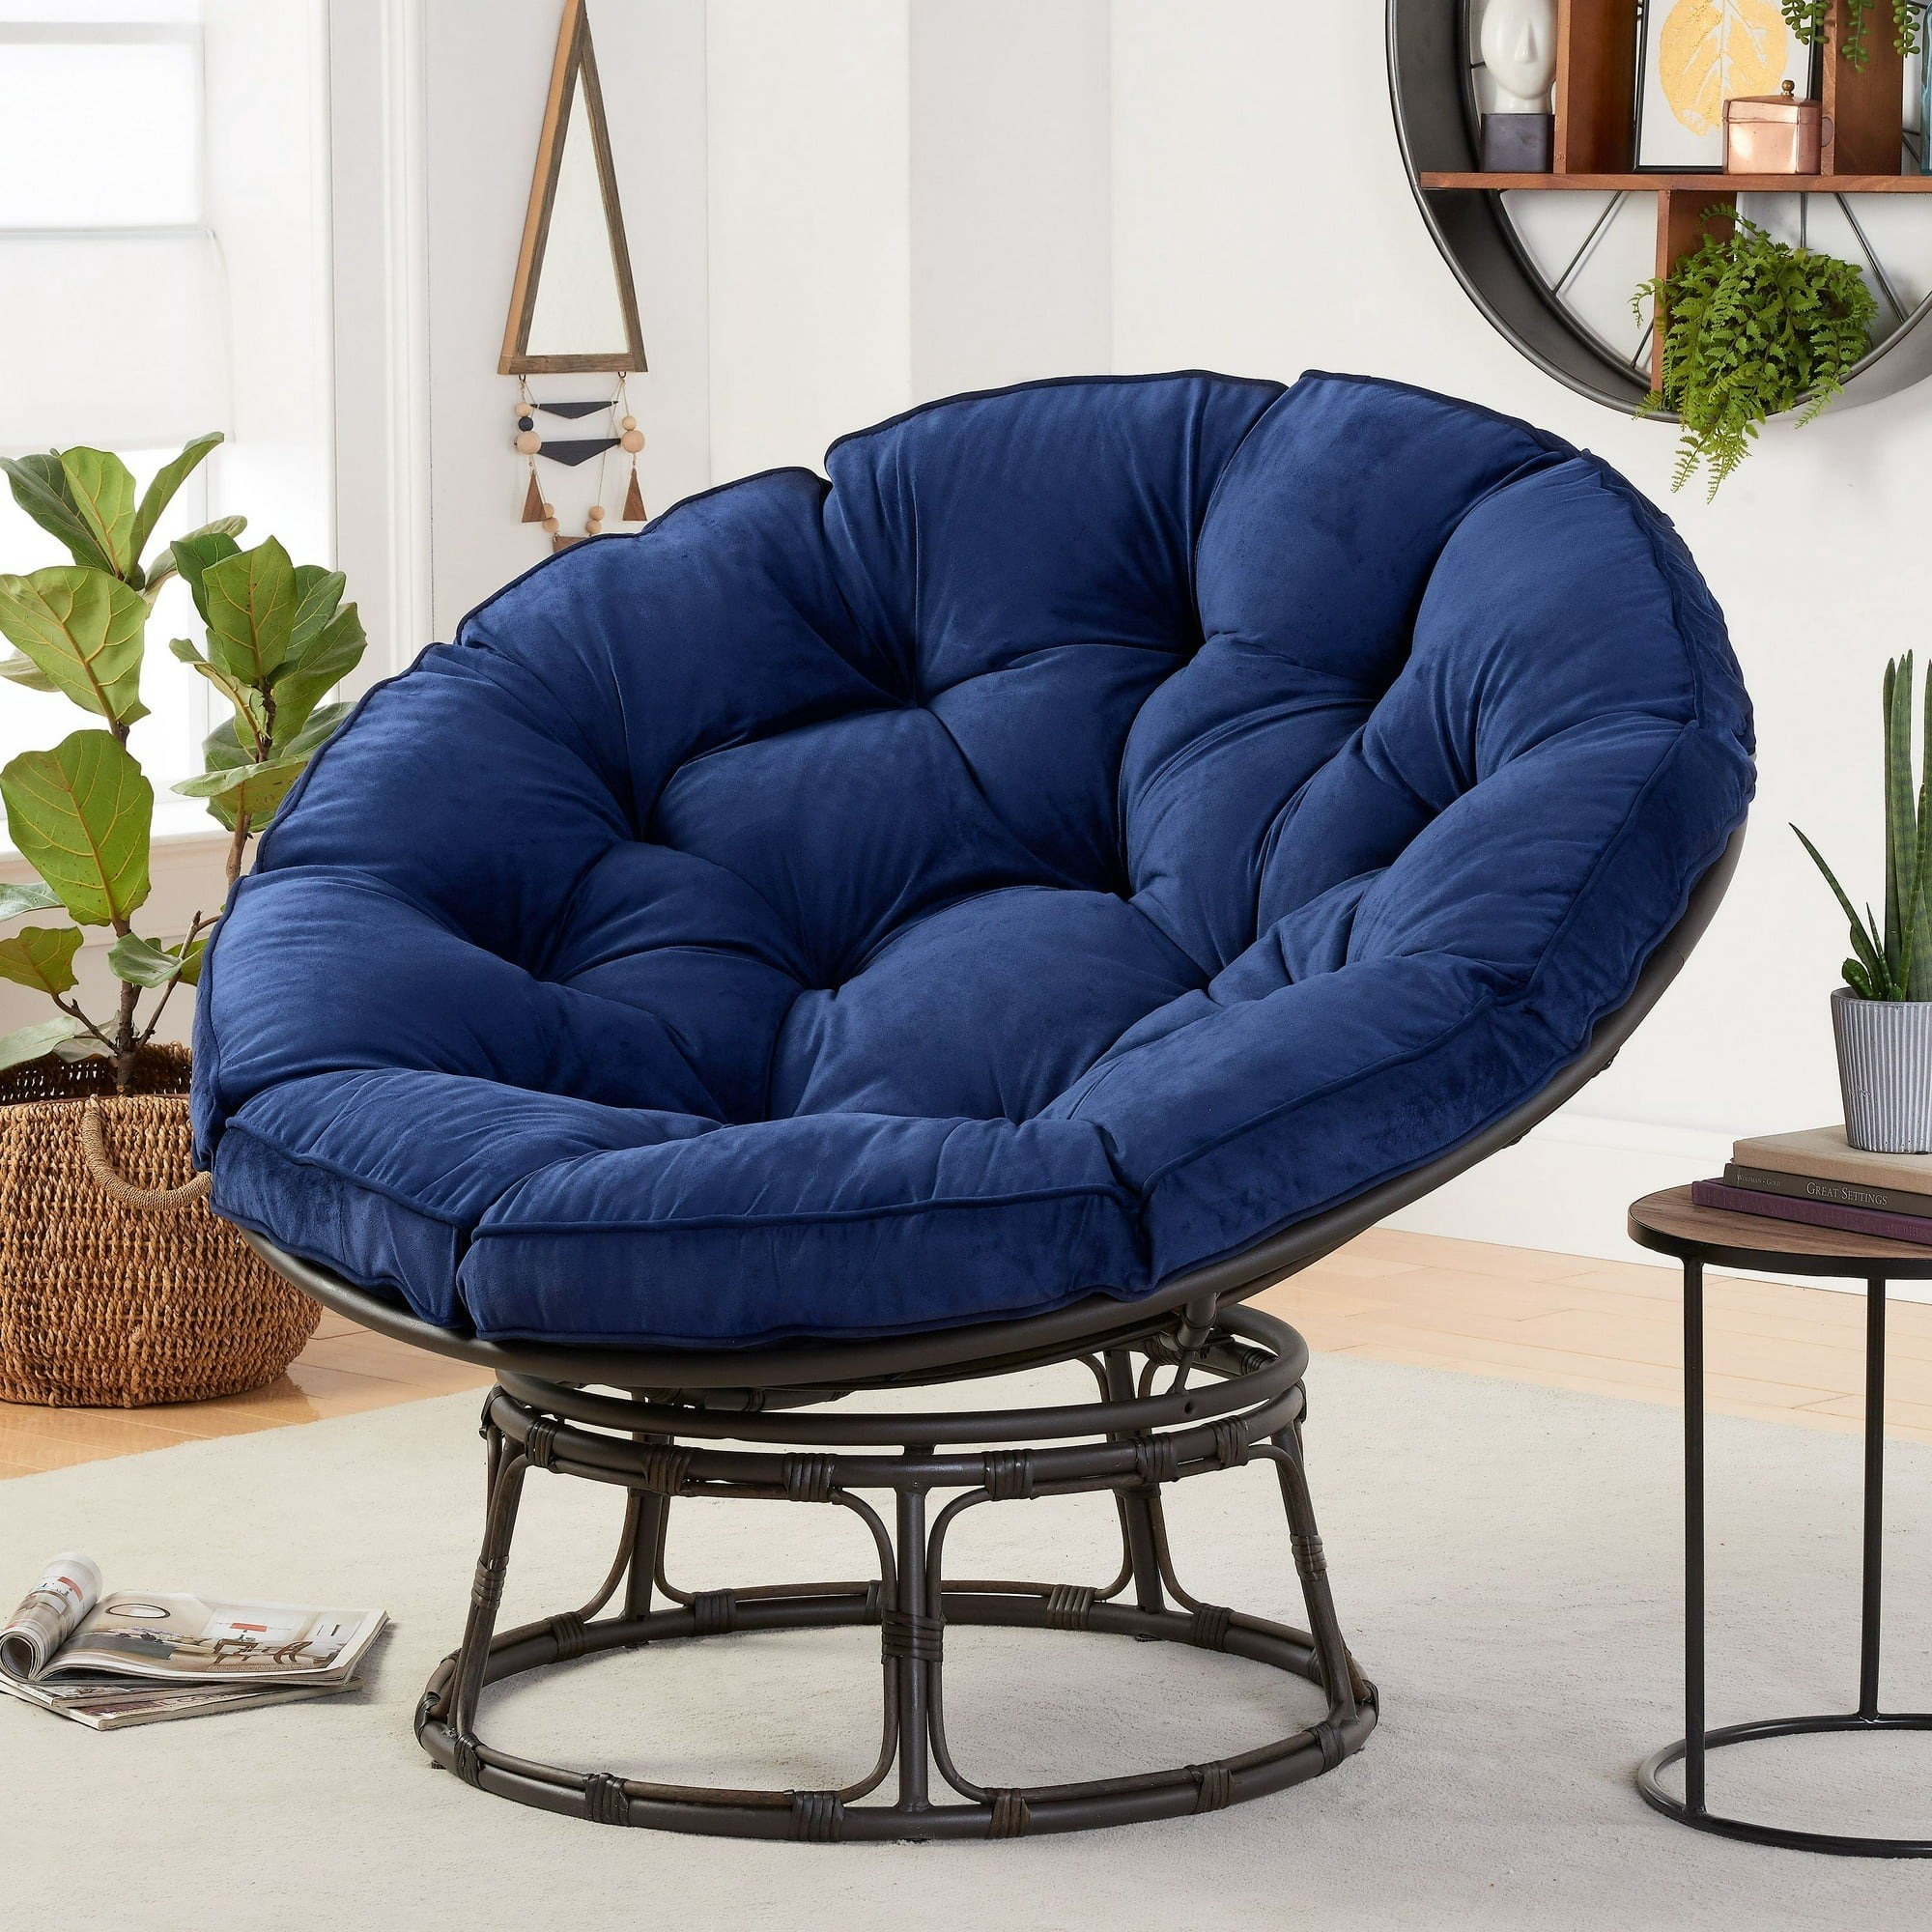 the circular chair with a tufted cushion in a bedroom